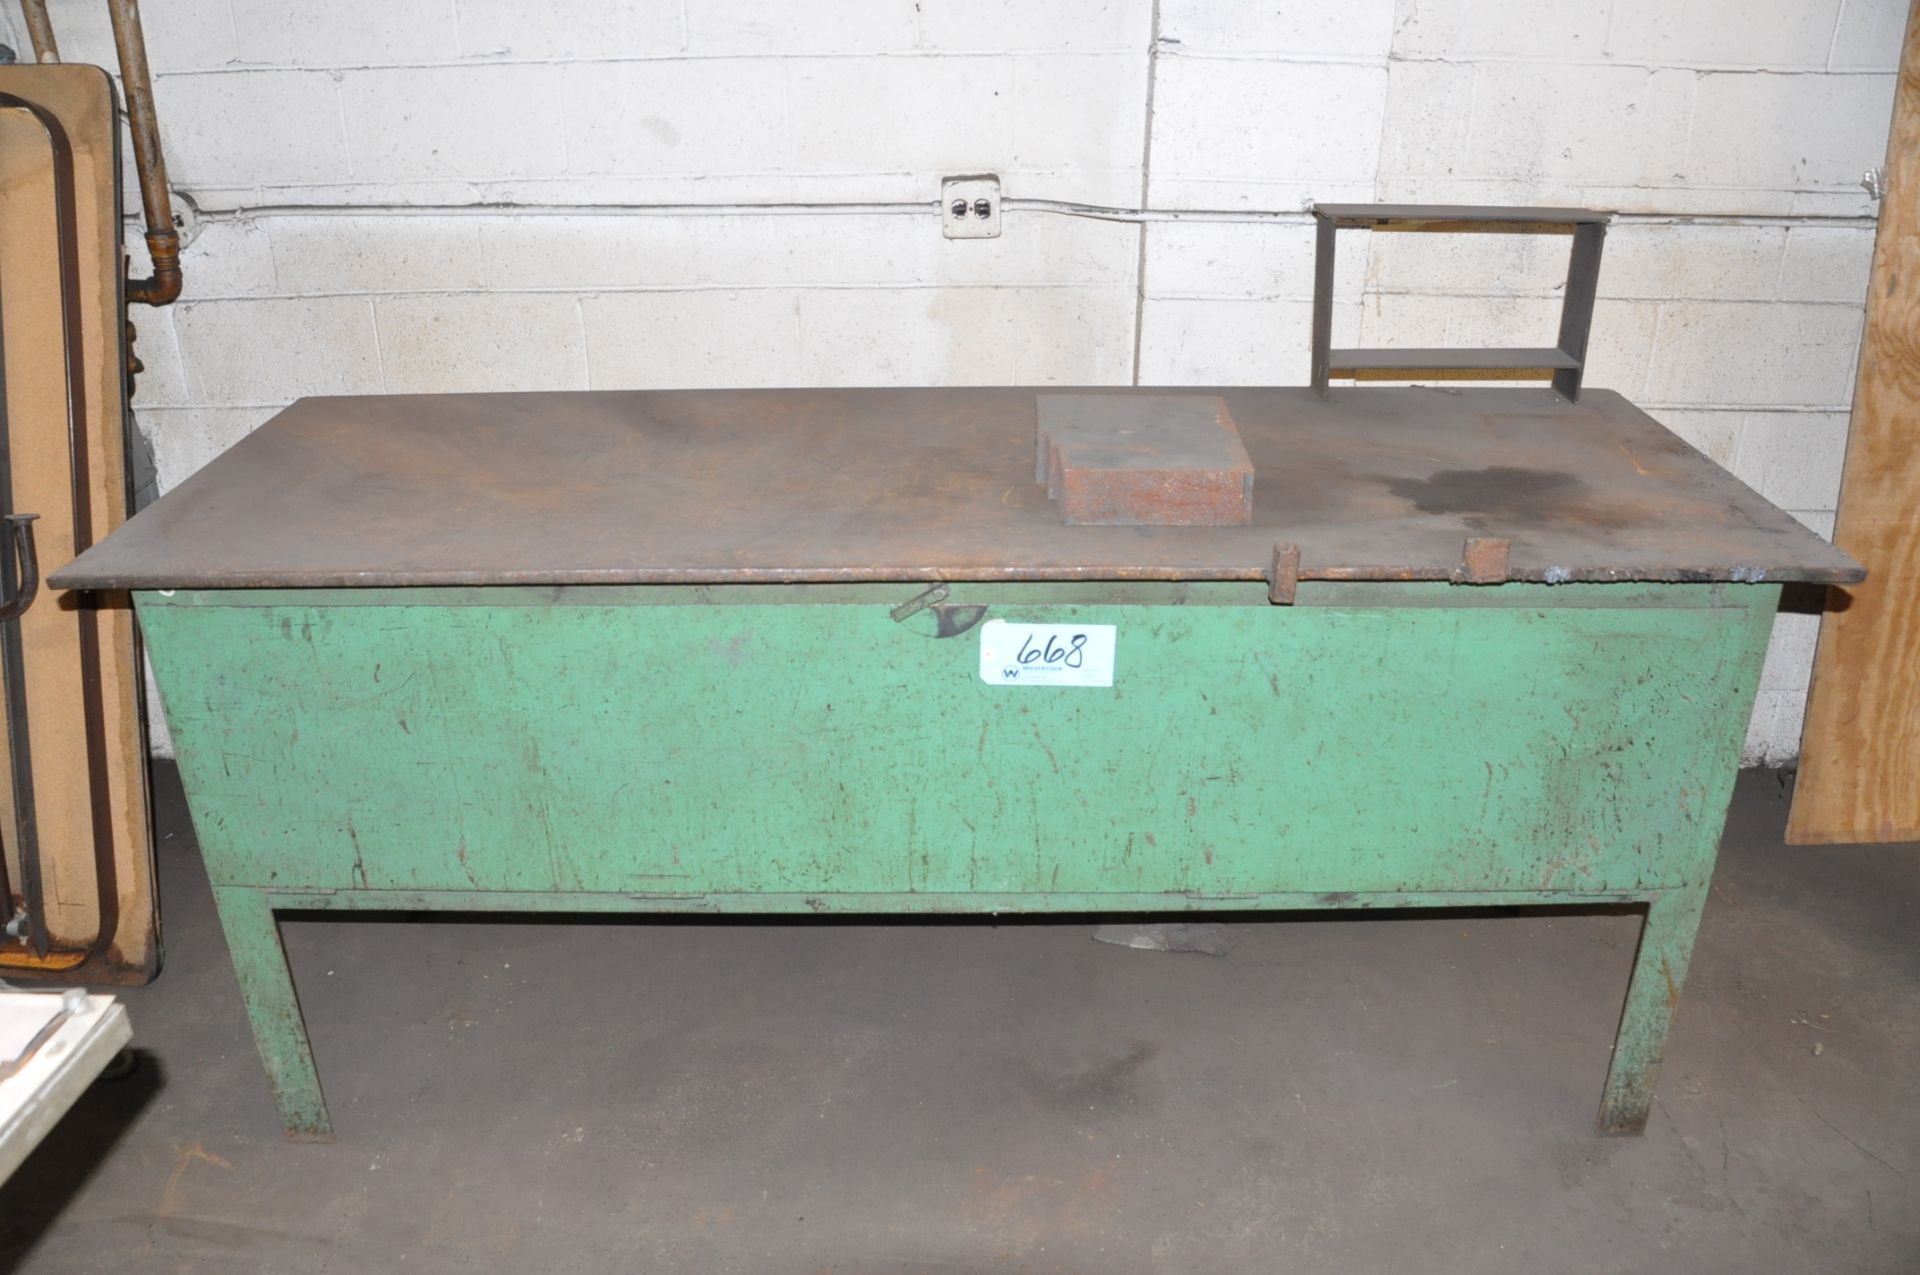 Lot-(1) 30" x 84" x 1/2" Steel Plate Topped Work Bench, (3) Steel Totes with Contents, Etc. (Bldg 2) - Image 2 of 2